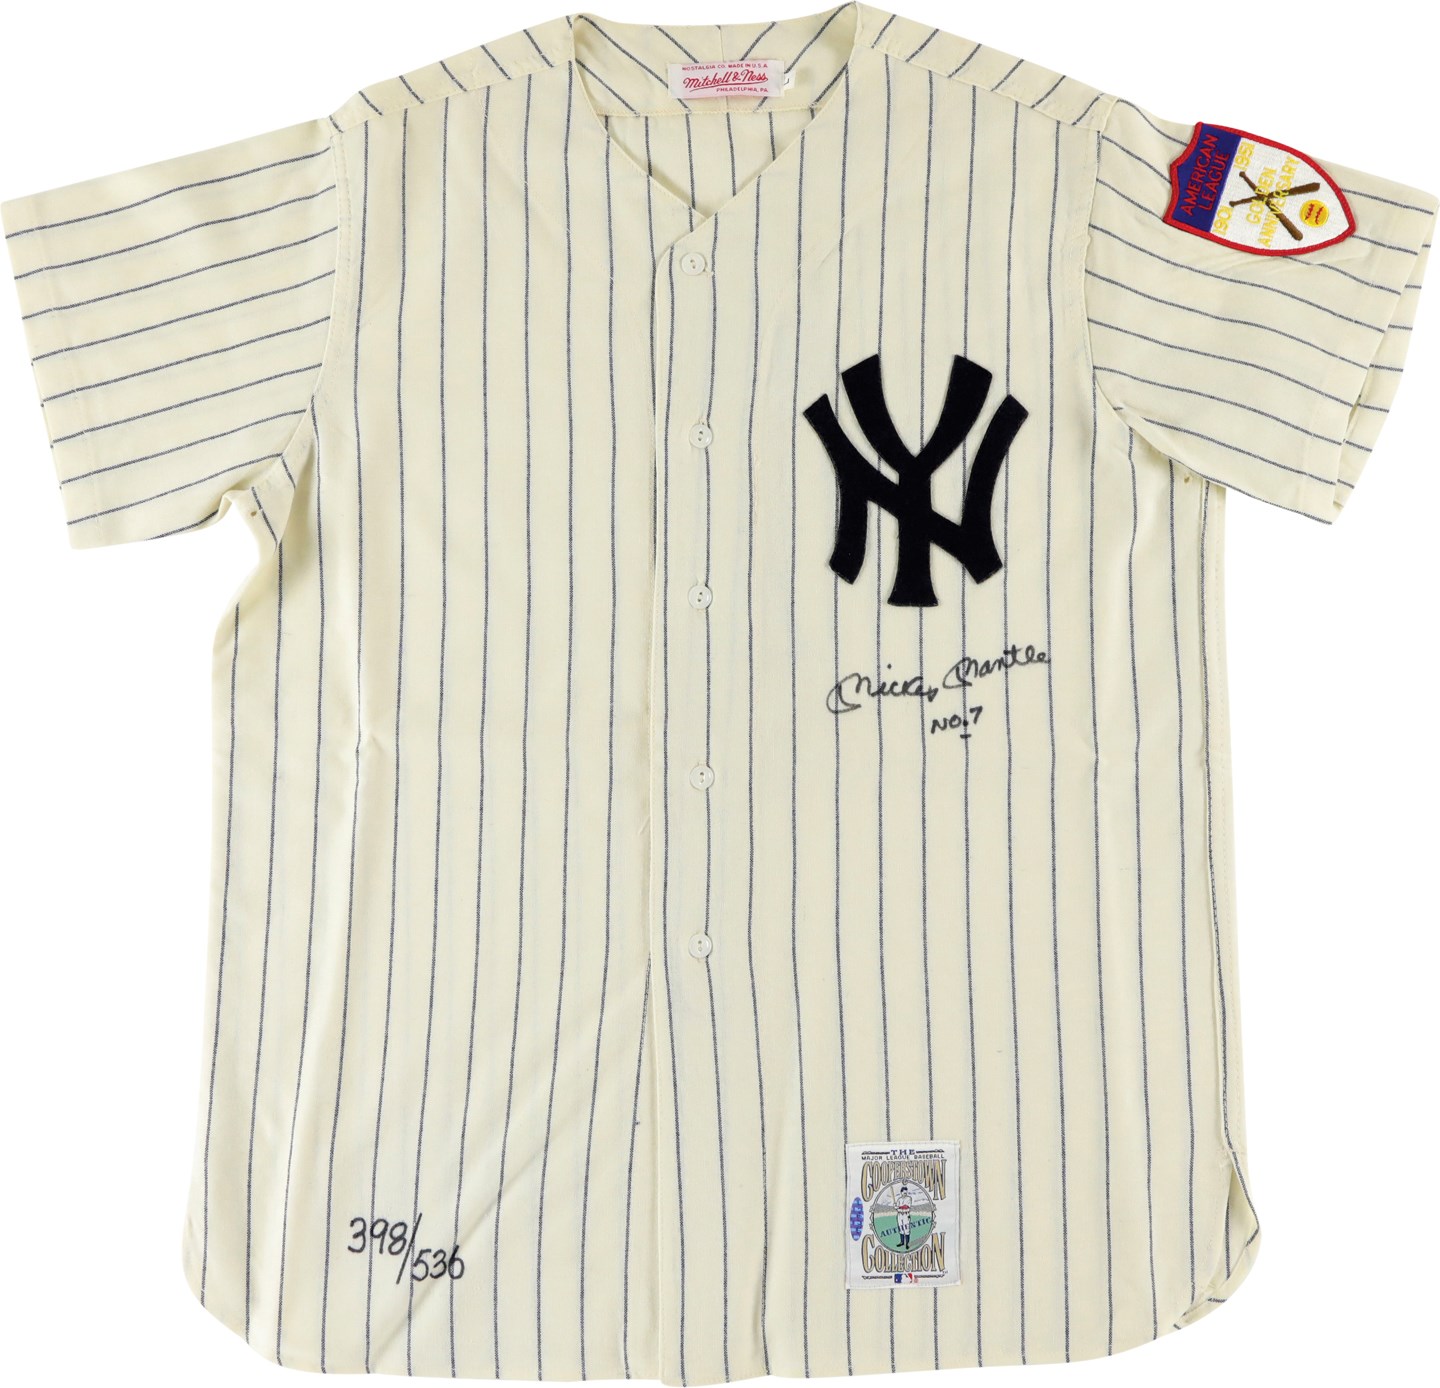 Baseball Autographs - Mickey Mantle "No. 7" Signed Inscribed Yankees Jersey #398/536 (UDA & PSA)